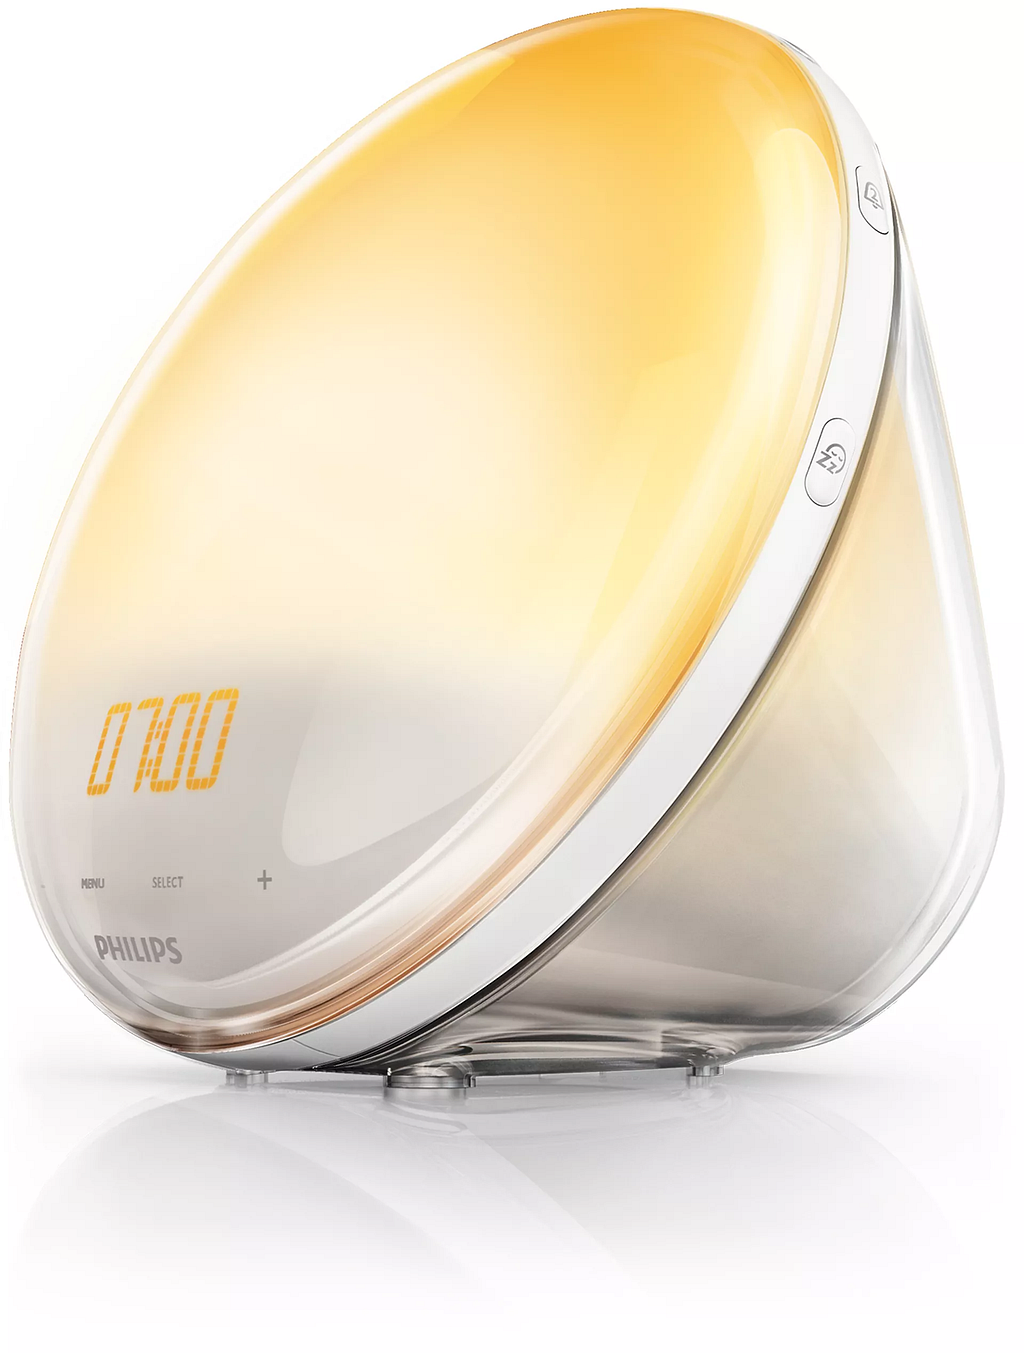 A picture of the Philips Wake-Up Light